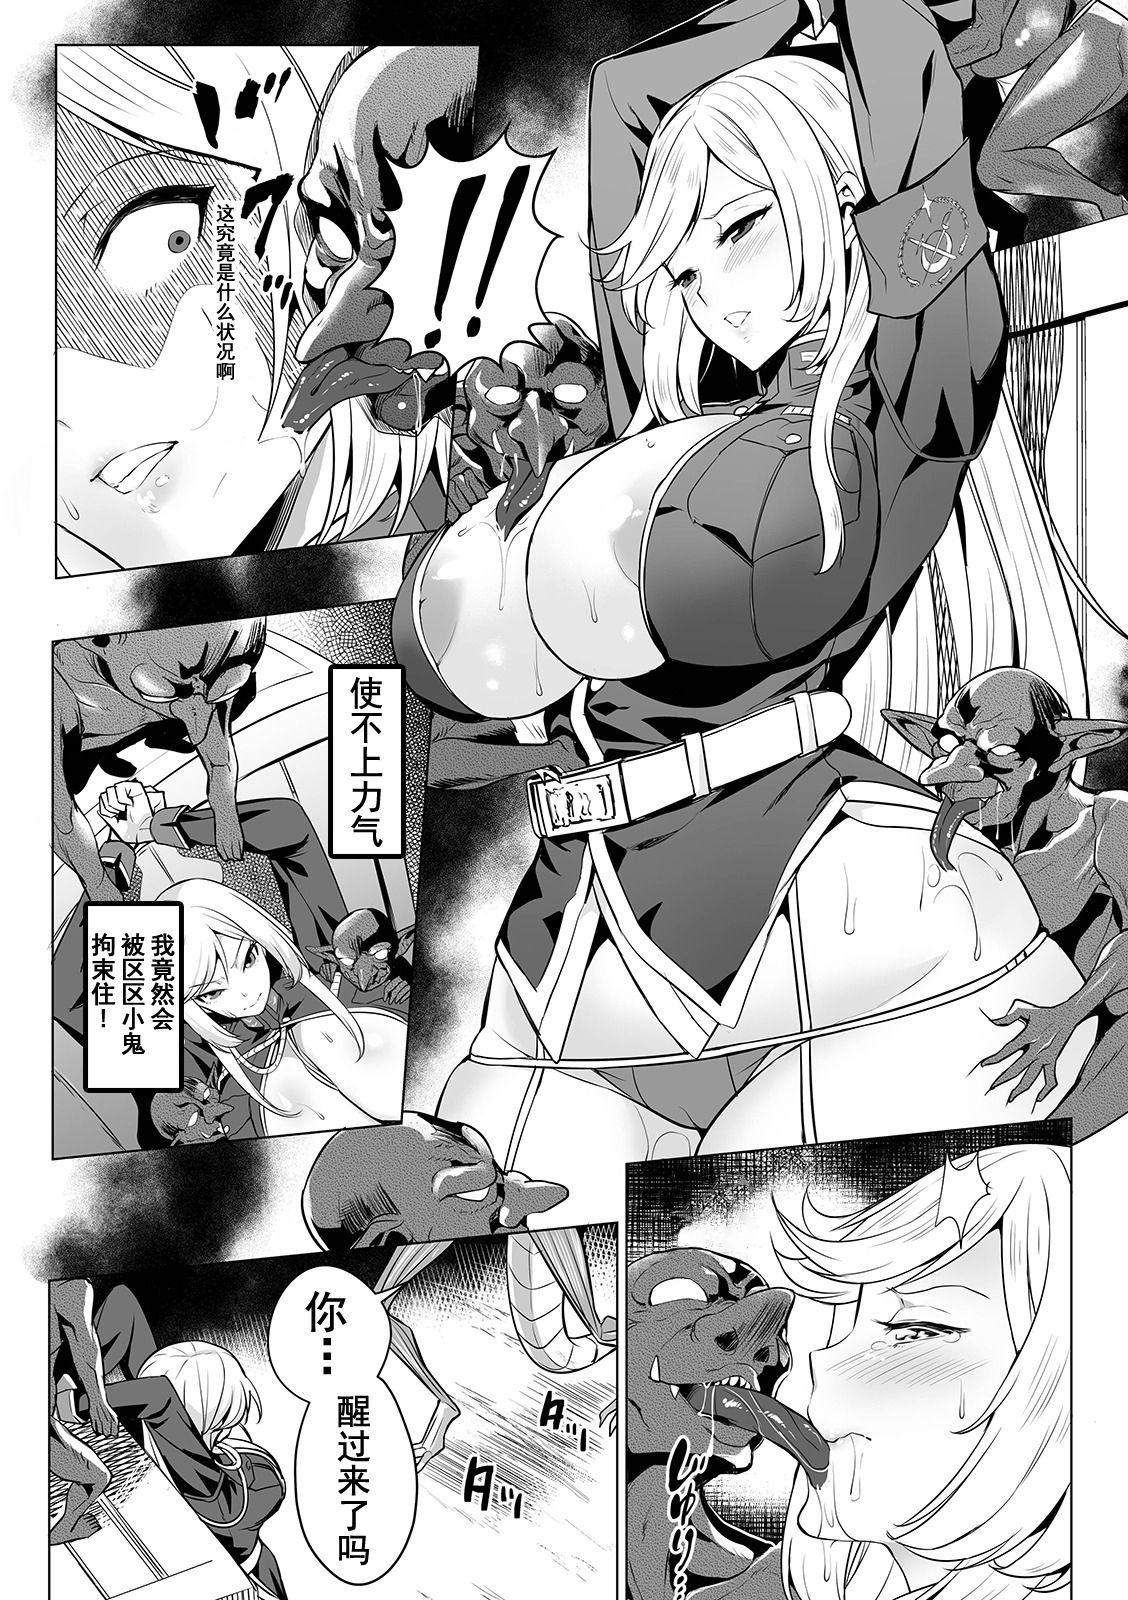 Ameture Porn Evil Slayers Cunnilingus - Page 6